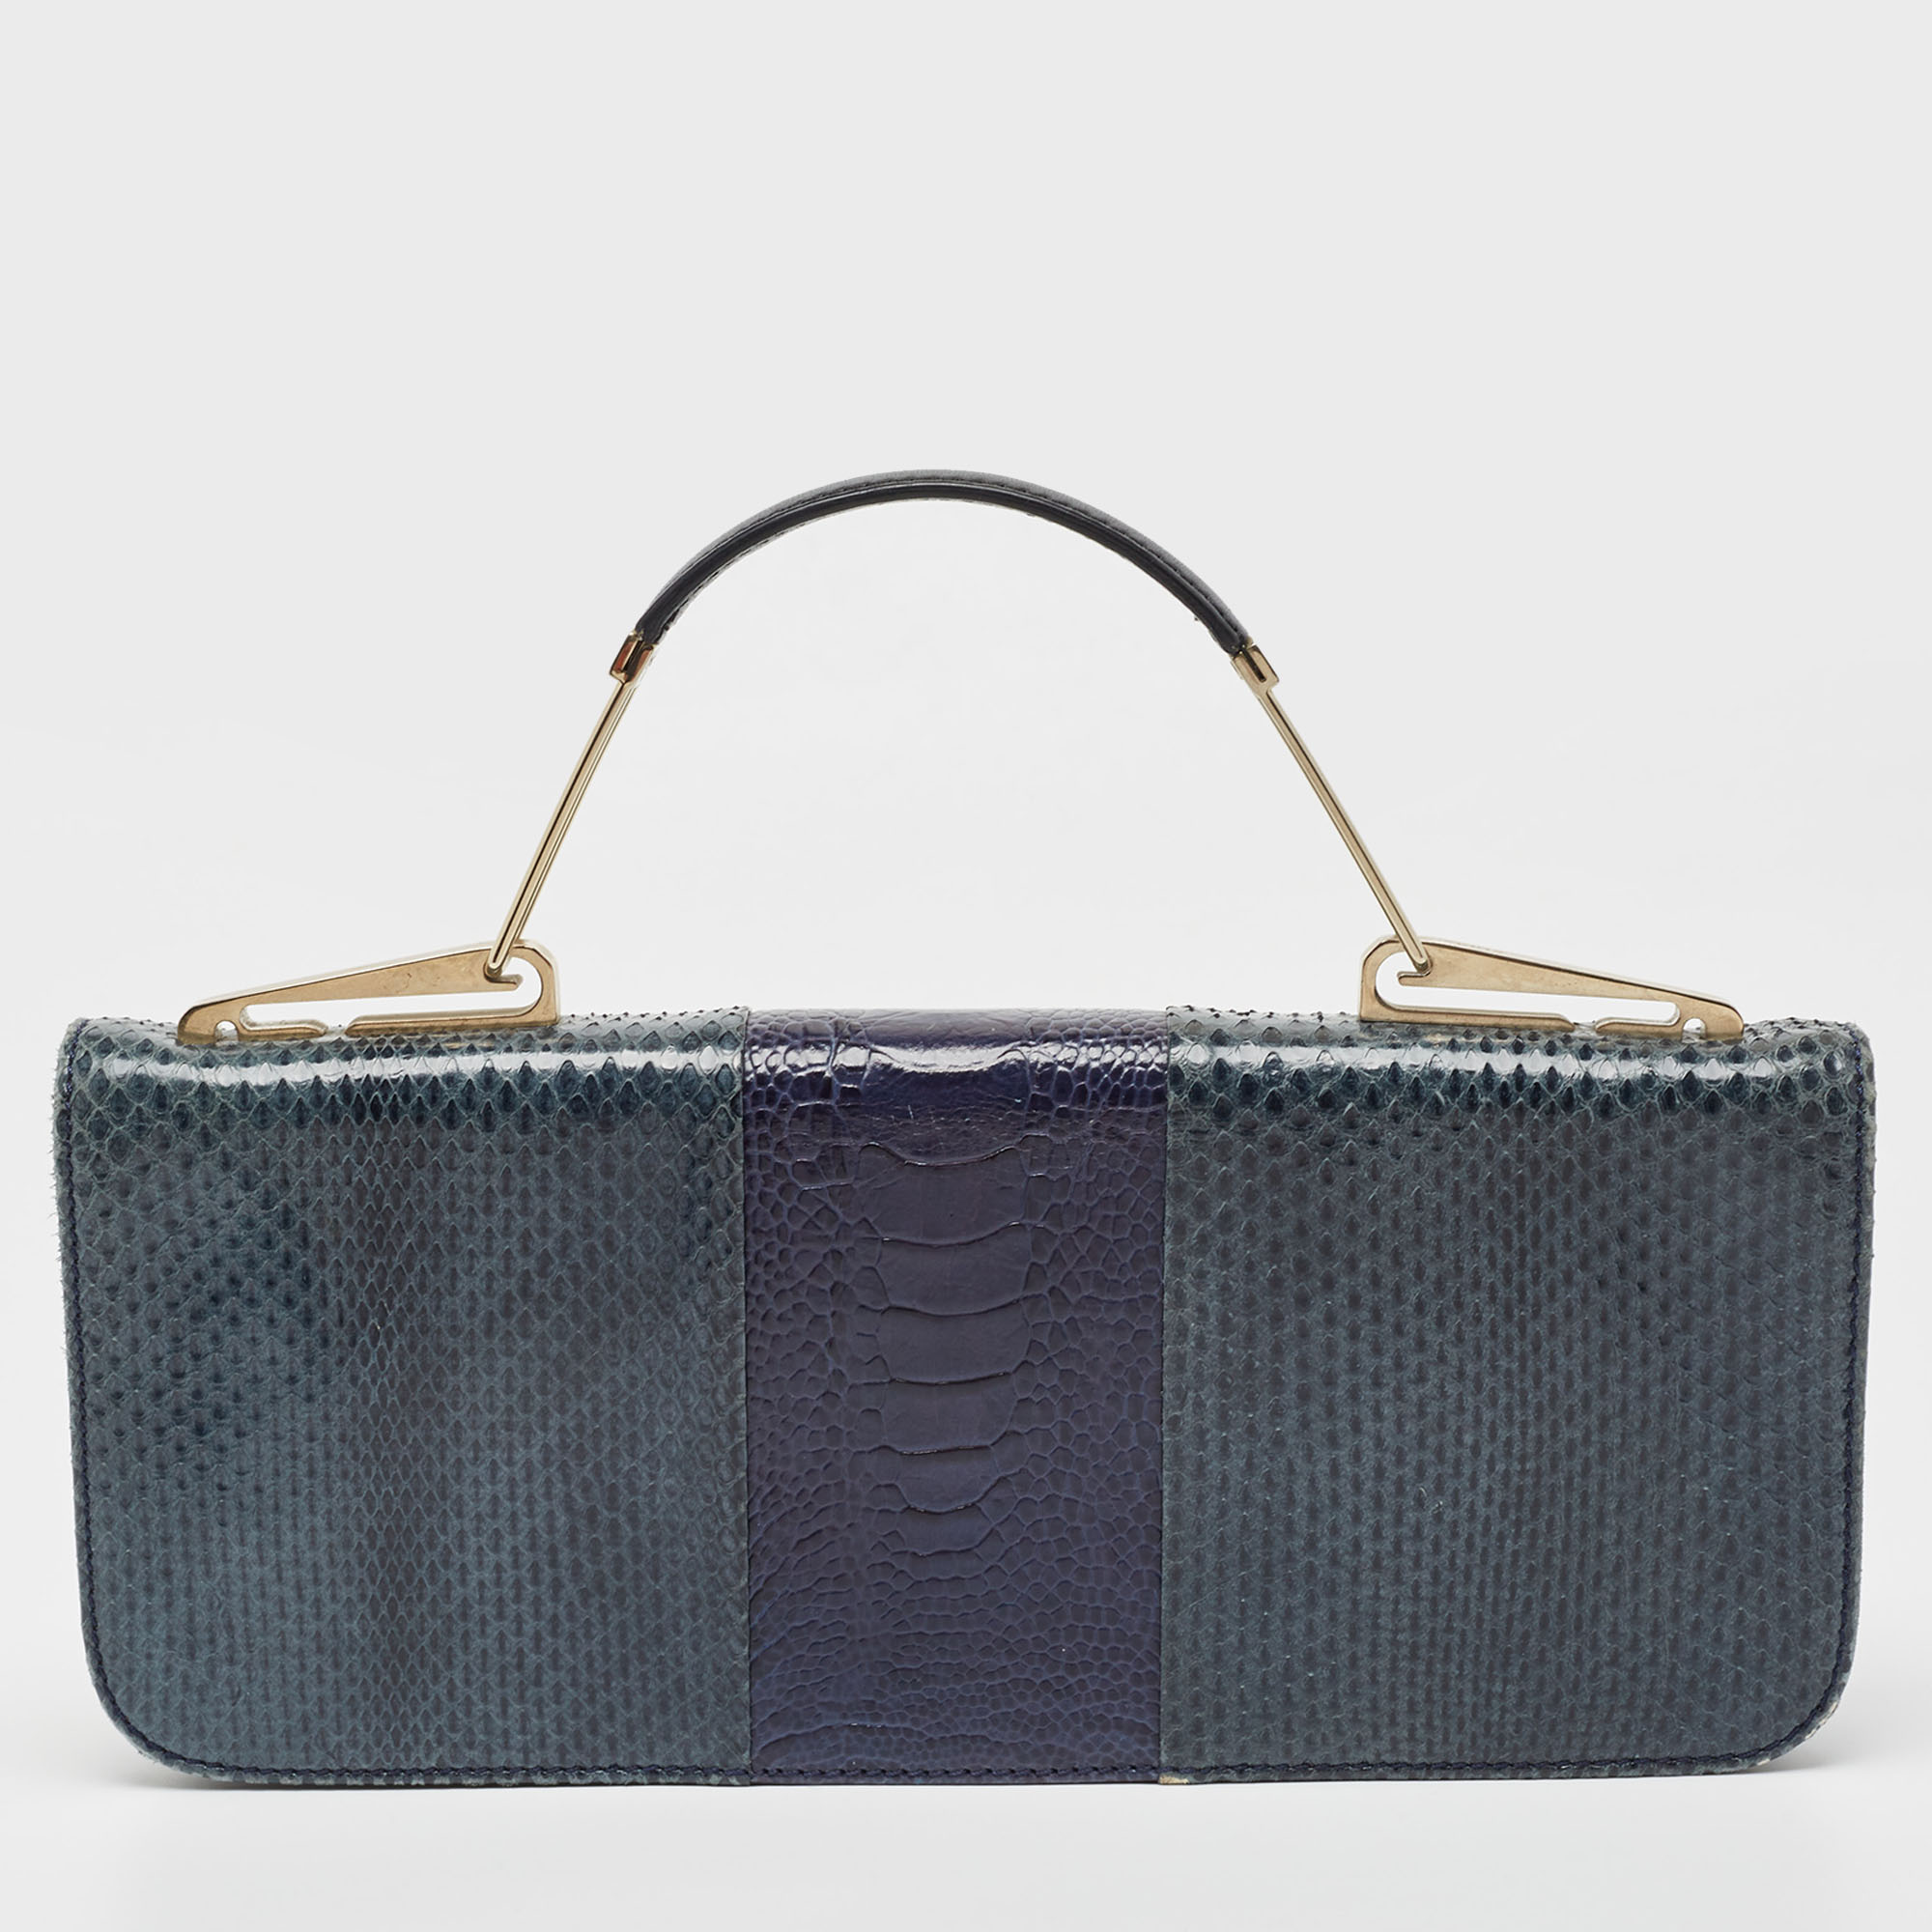 Emilio Pucci Tricolor Snakeskin And Ostrich Embossed Leather Clutch